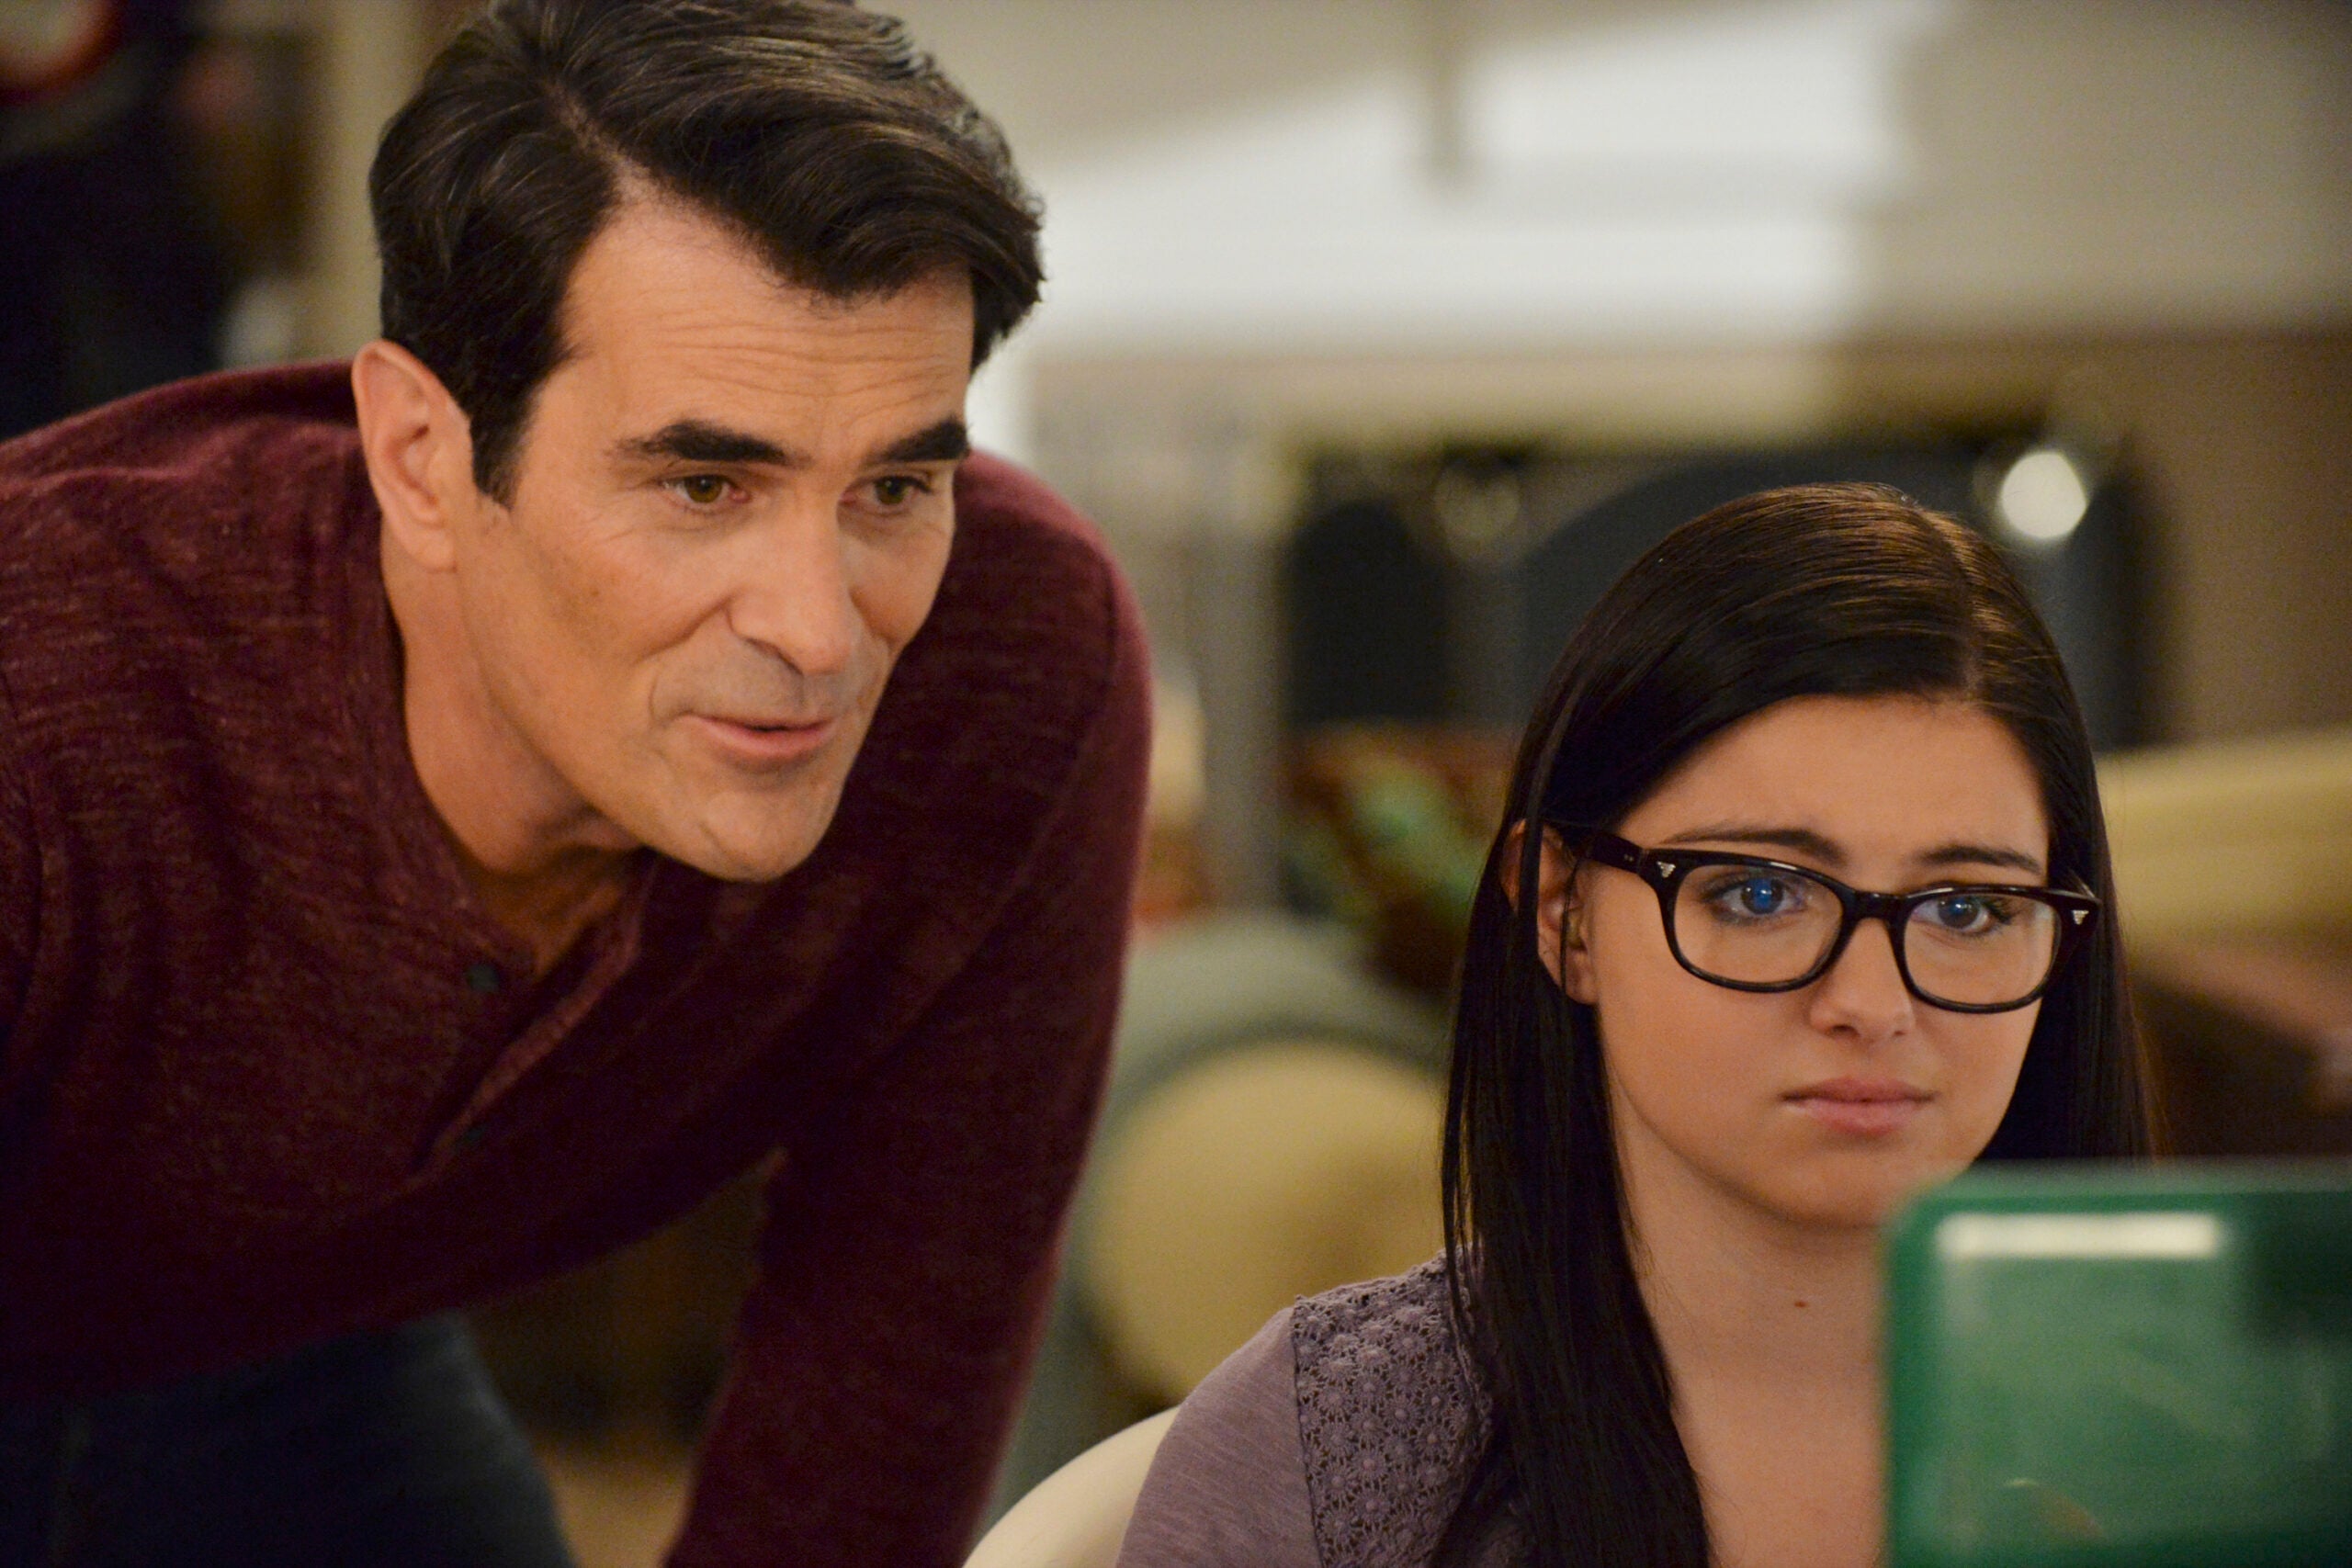 Phill Dunphy, played by Ty Burrell. and Alex Dunphy, played by Ariel Winter, in ABC's "Modern Family"